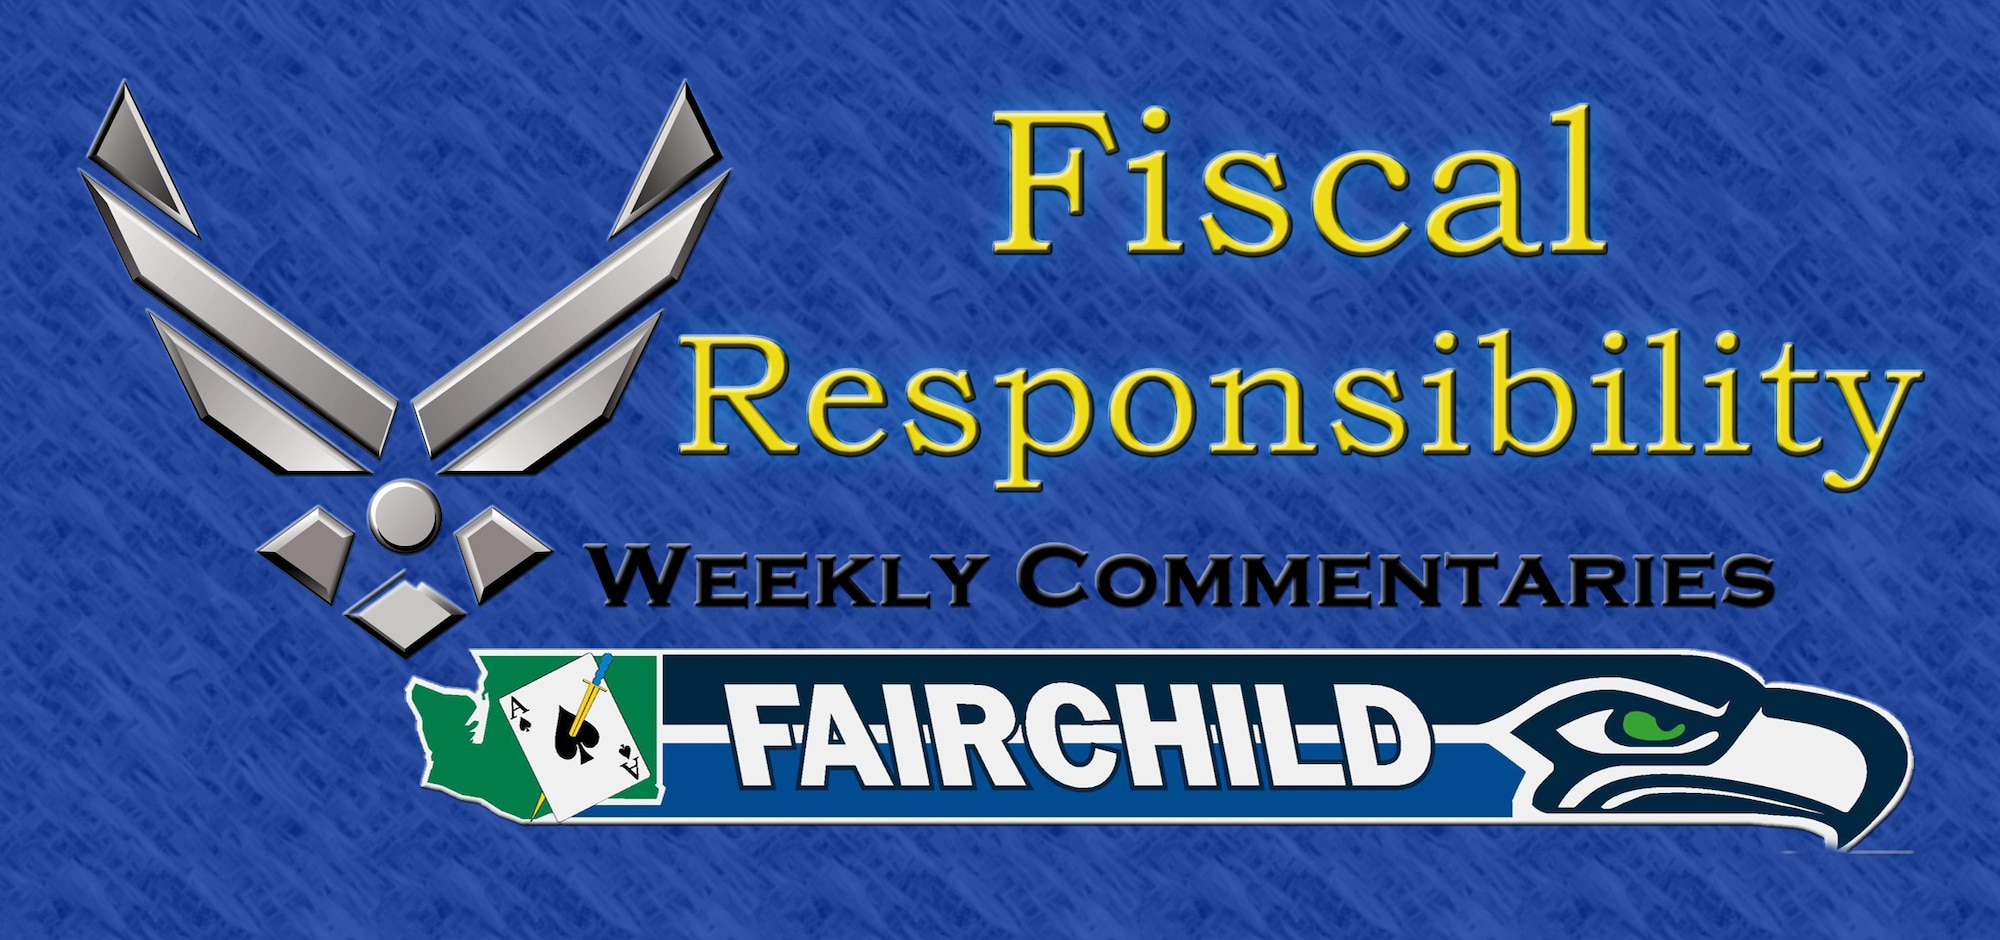 Fairchild leadership writes commentaries focused on a wide arrary of topics important to all servicemembers. (U.S. Air Force graphic by Senior Airman Benjamin Stratton)